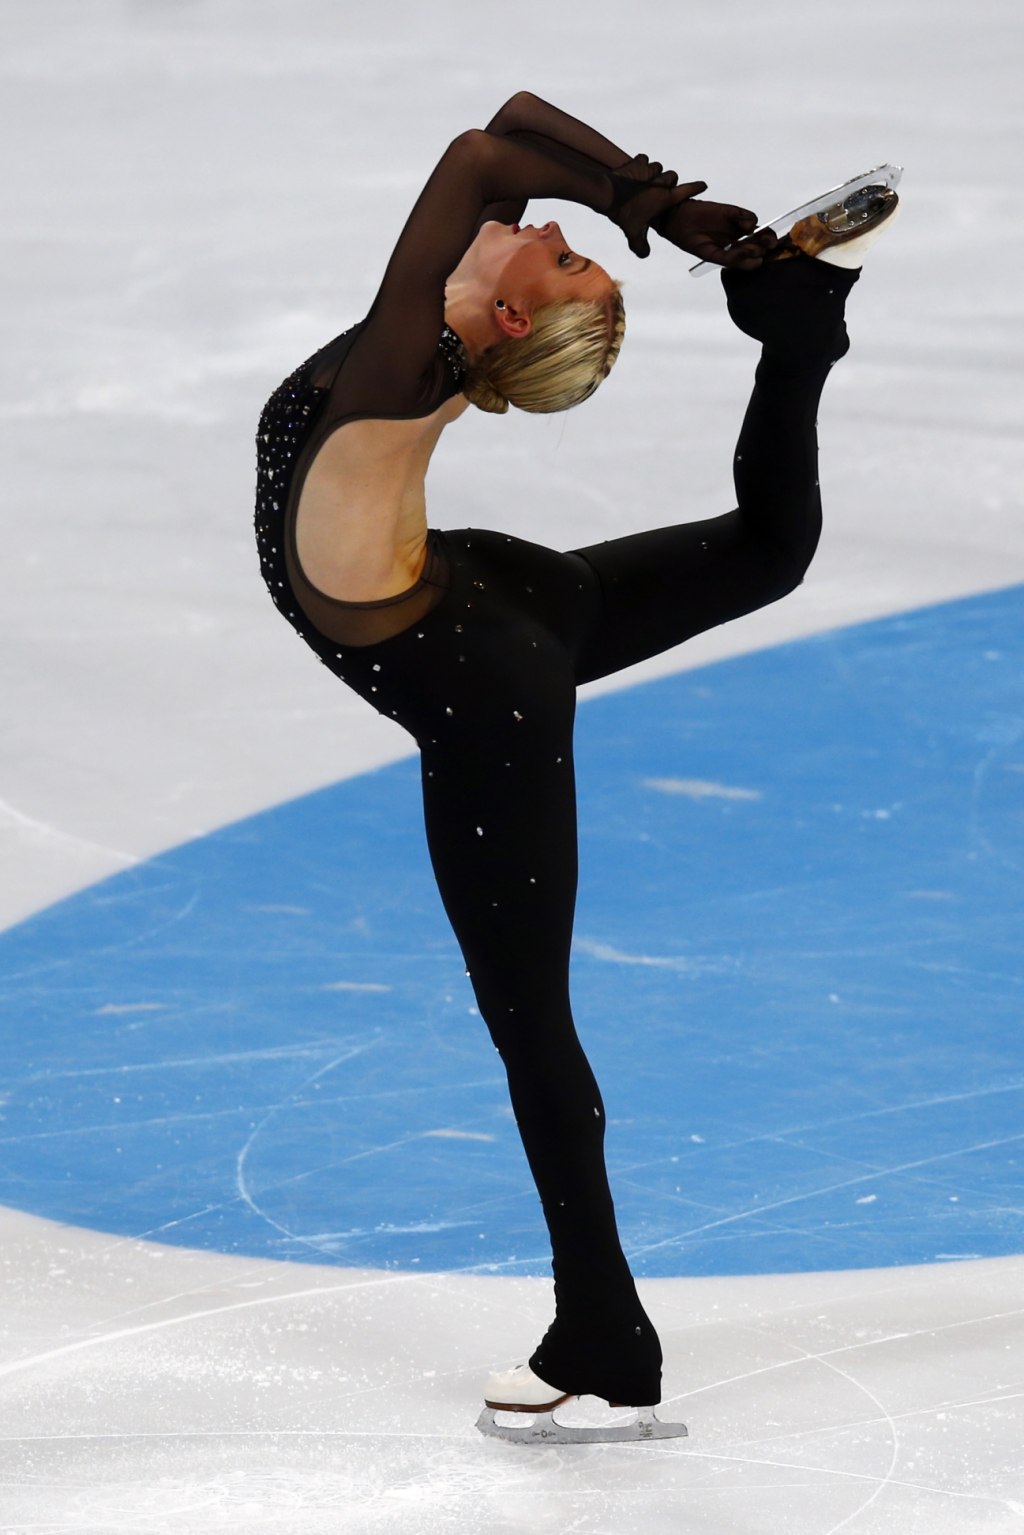 Ashley Cain of United States performs during the Cup of Russia фото (photo)